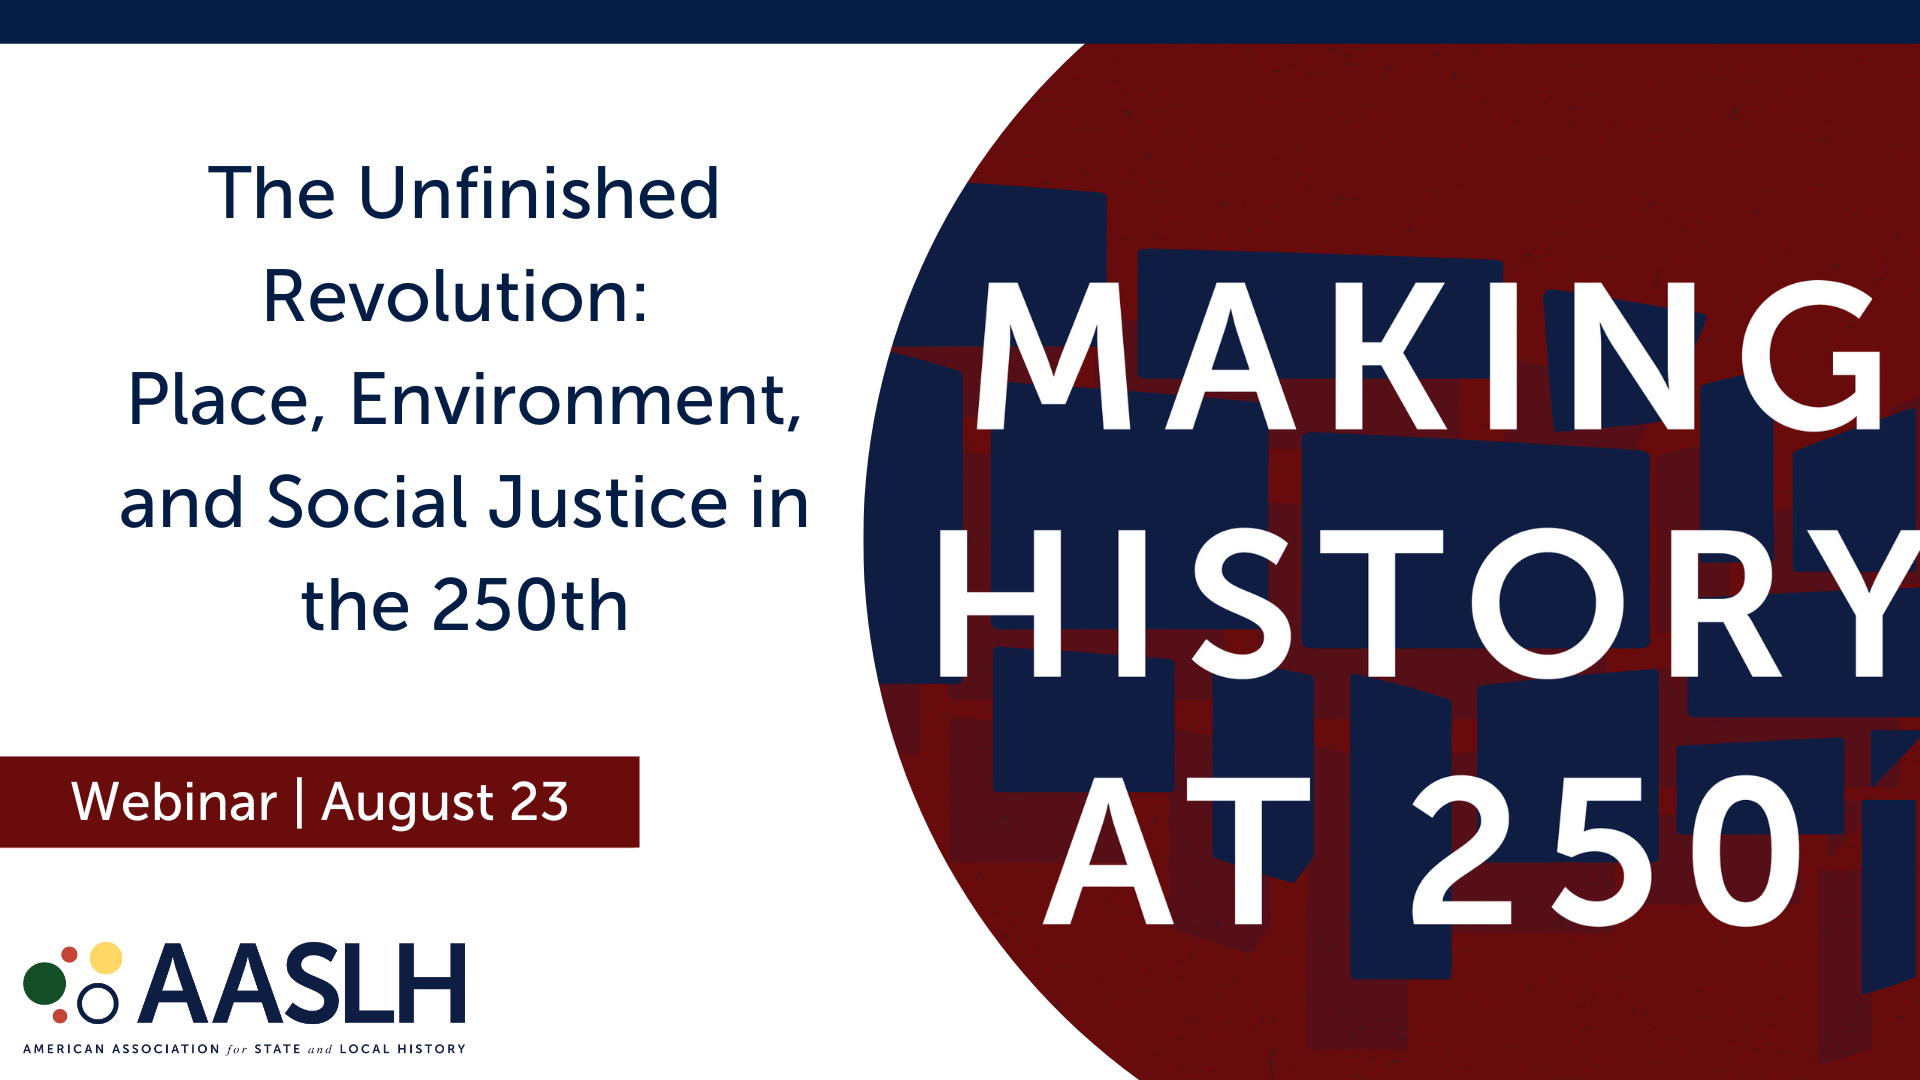 Discussion of the Unfinished Revolution: Place, Environment, and Social Justice in the 250th - Recorded Webinar